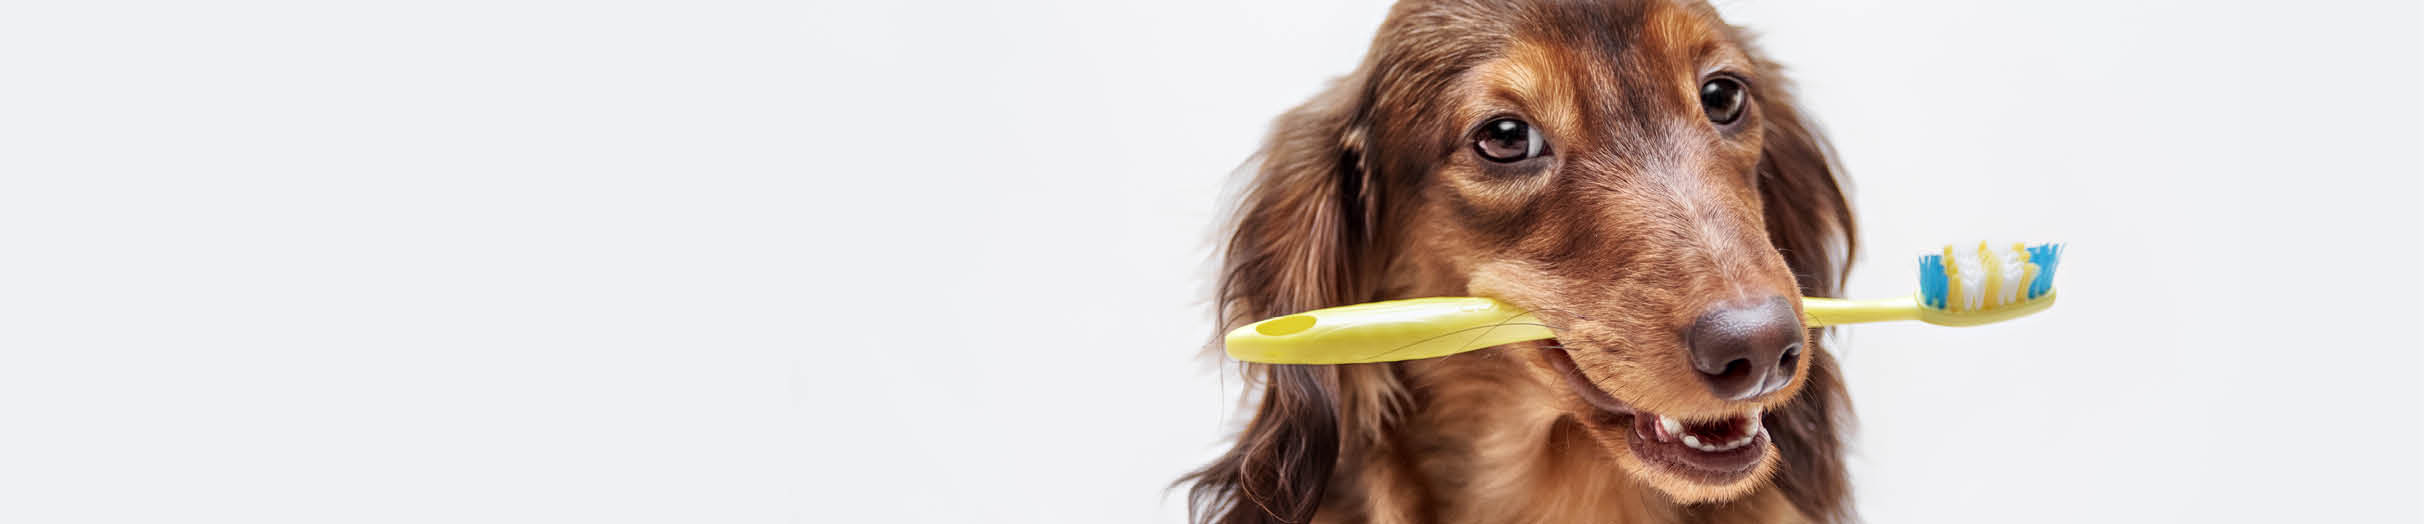 Buy dog oral care products online.